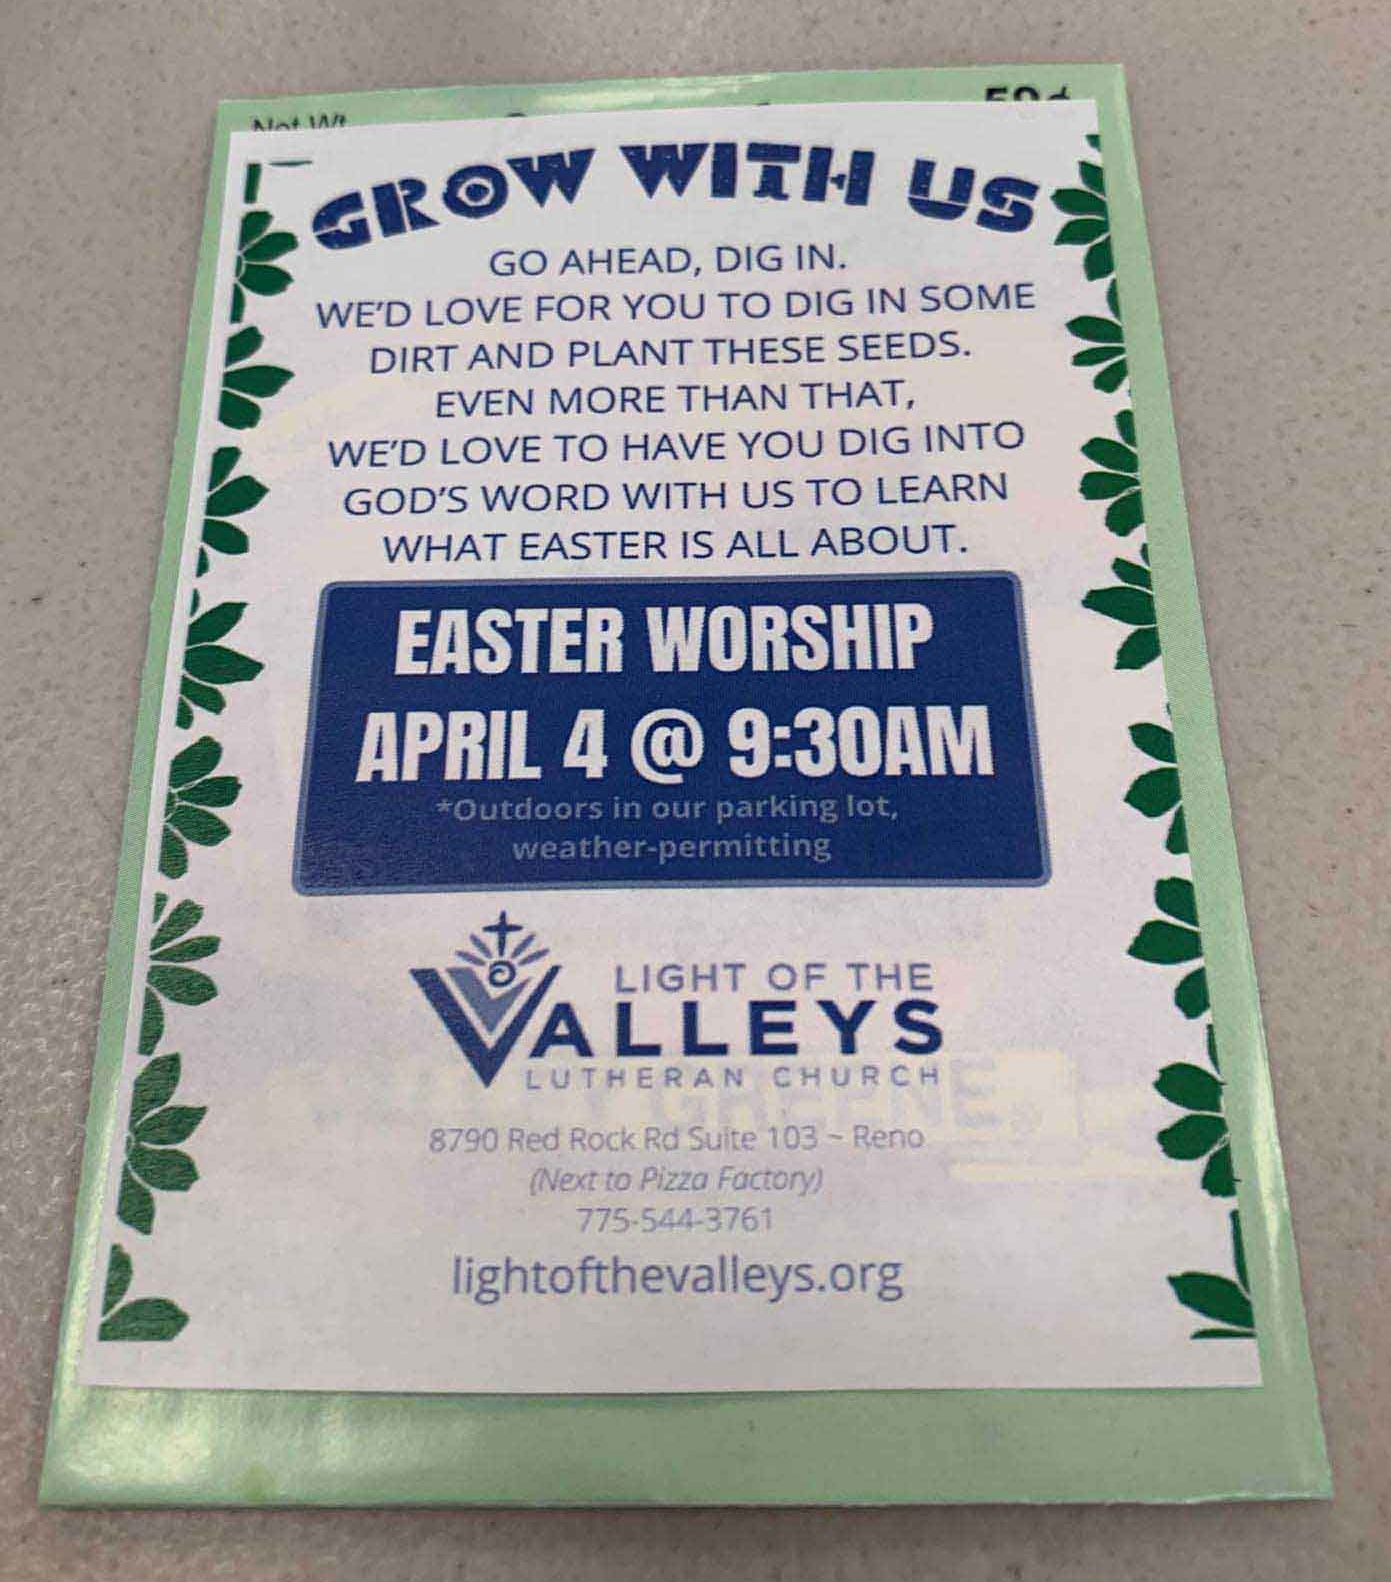 Seed packet with Easter worship invitation